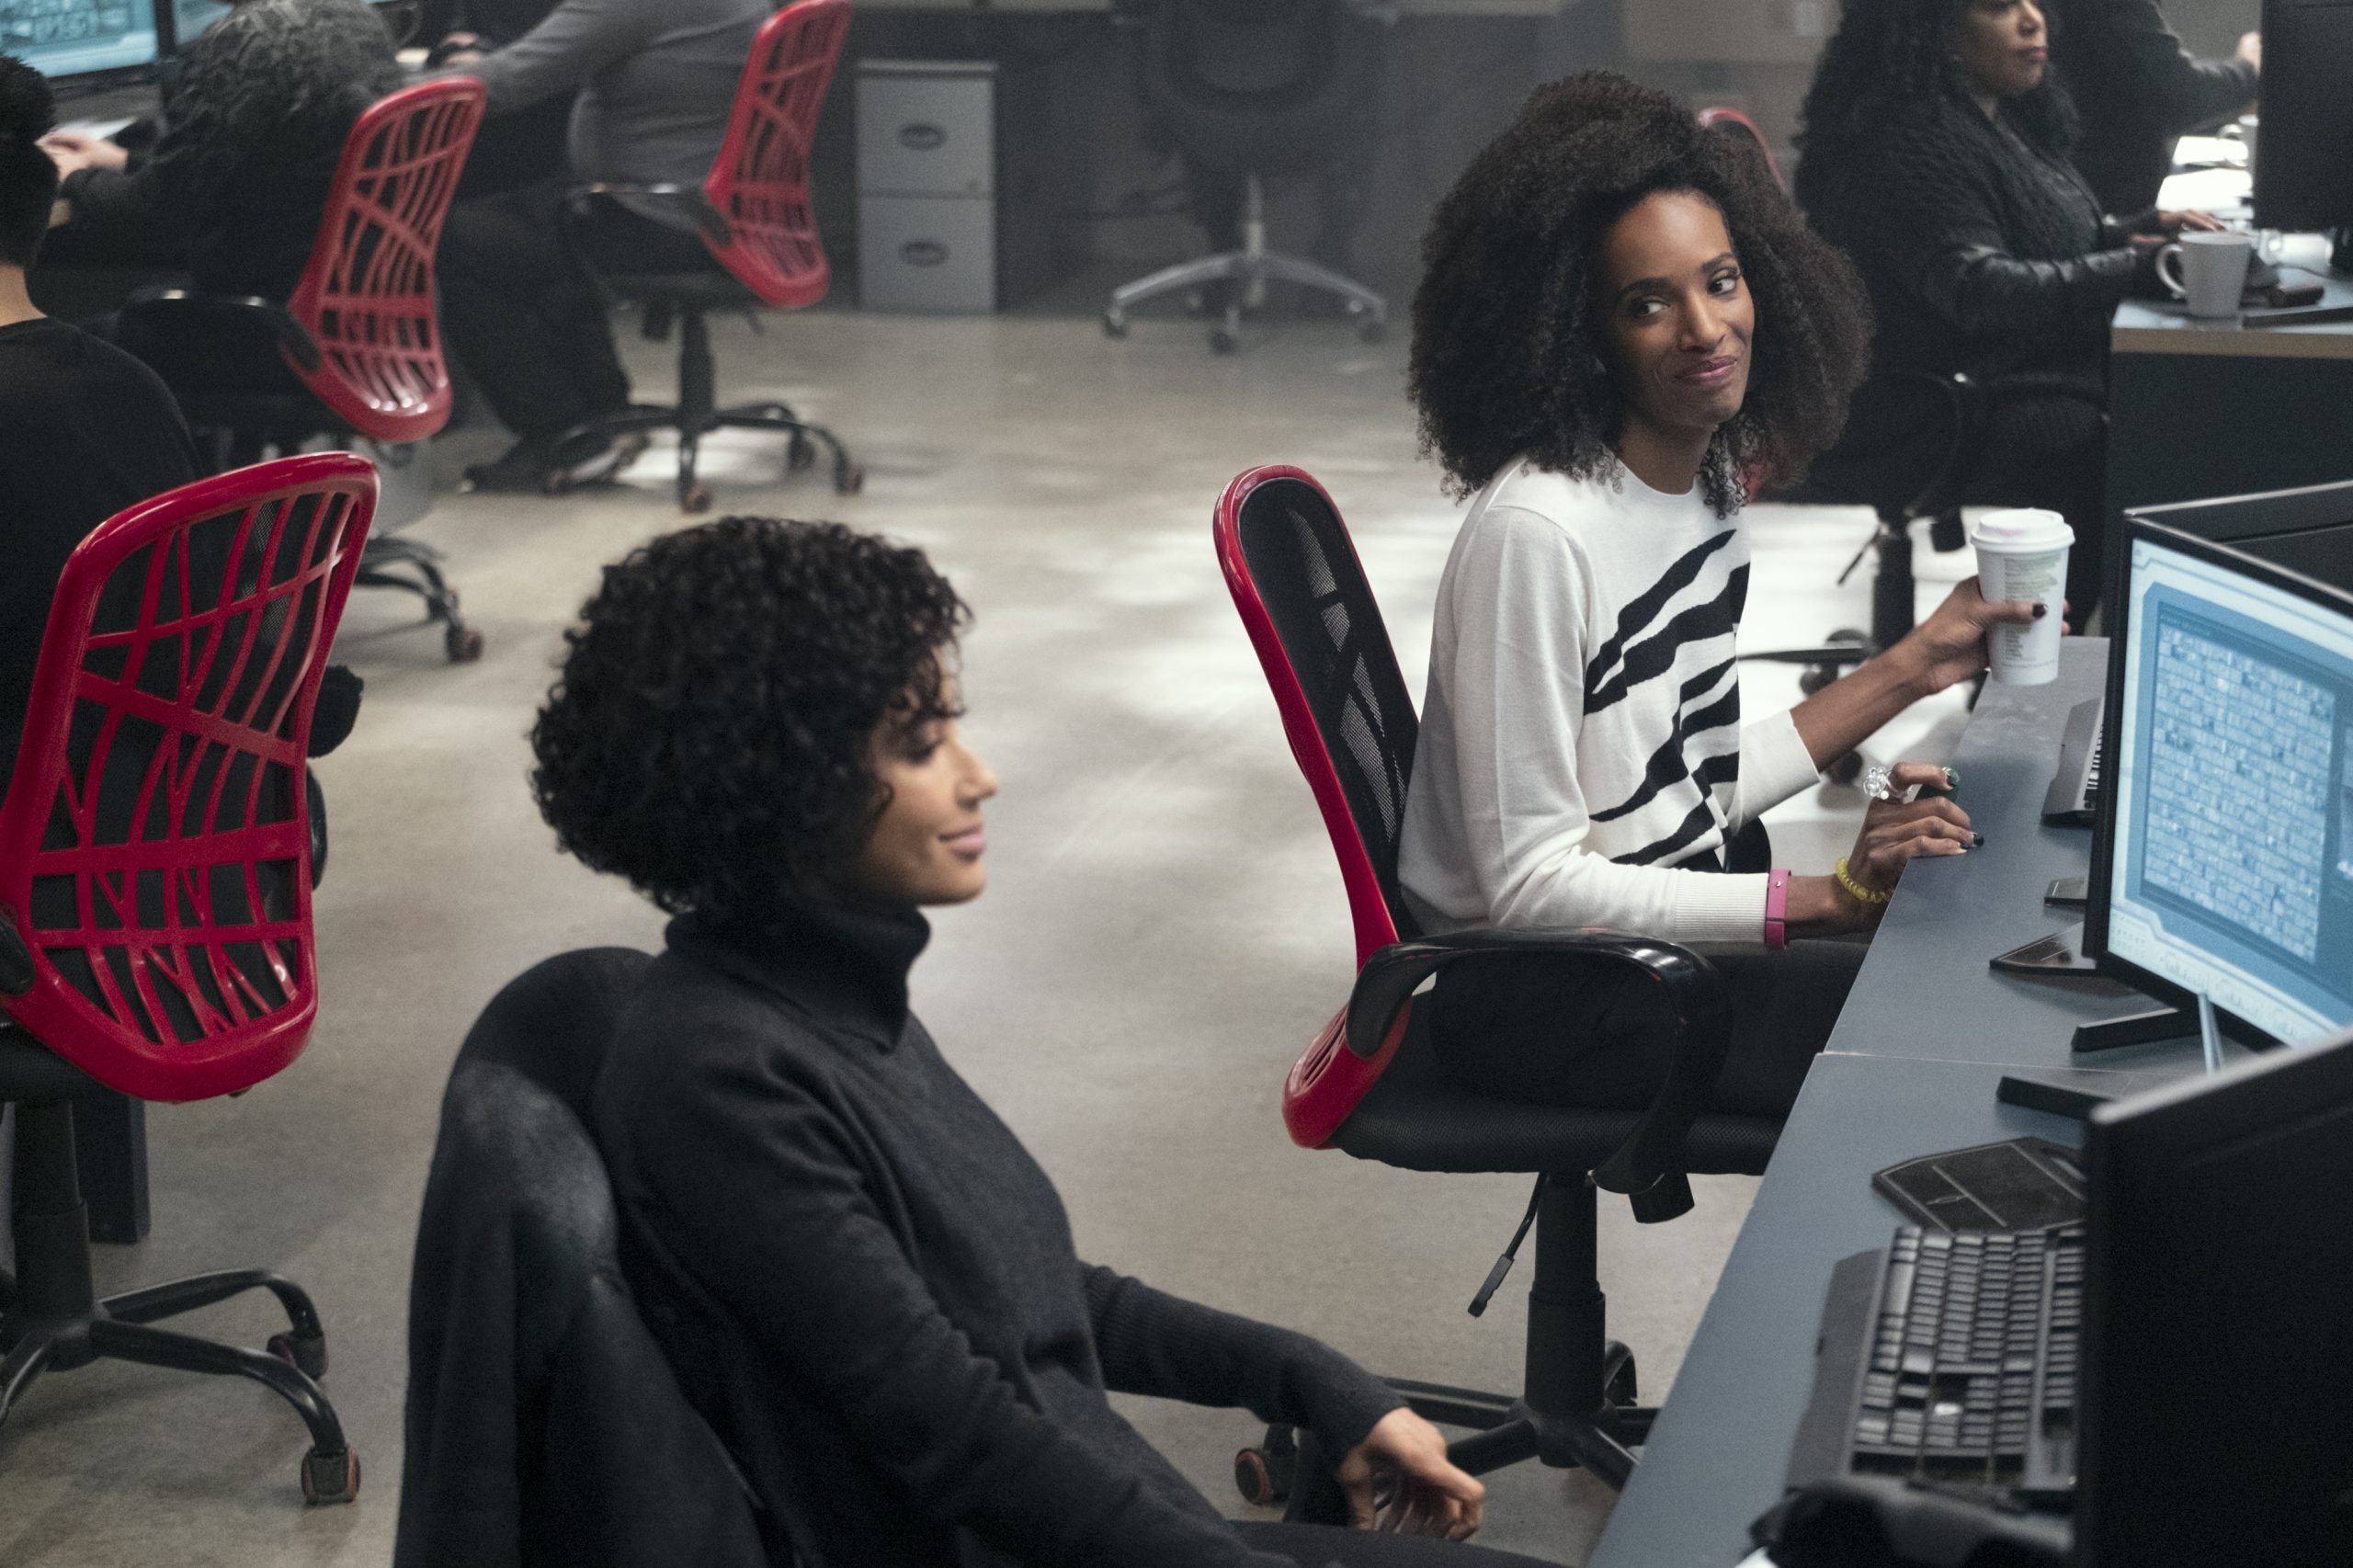 Andy Allo And Zainab Johnson On Being Authentically Black “Angels” On ‘Upload’ Season 2